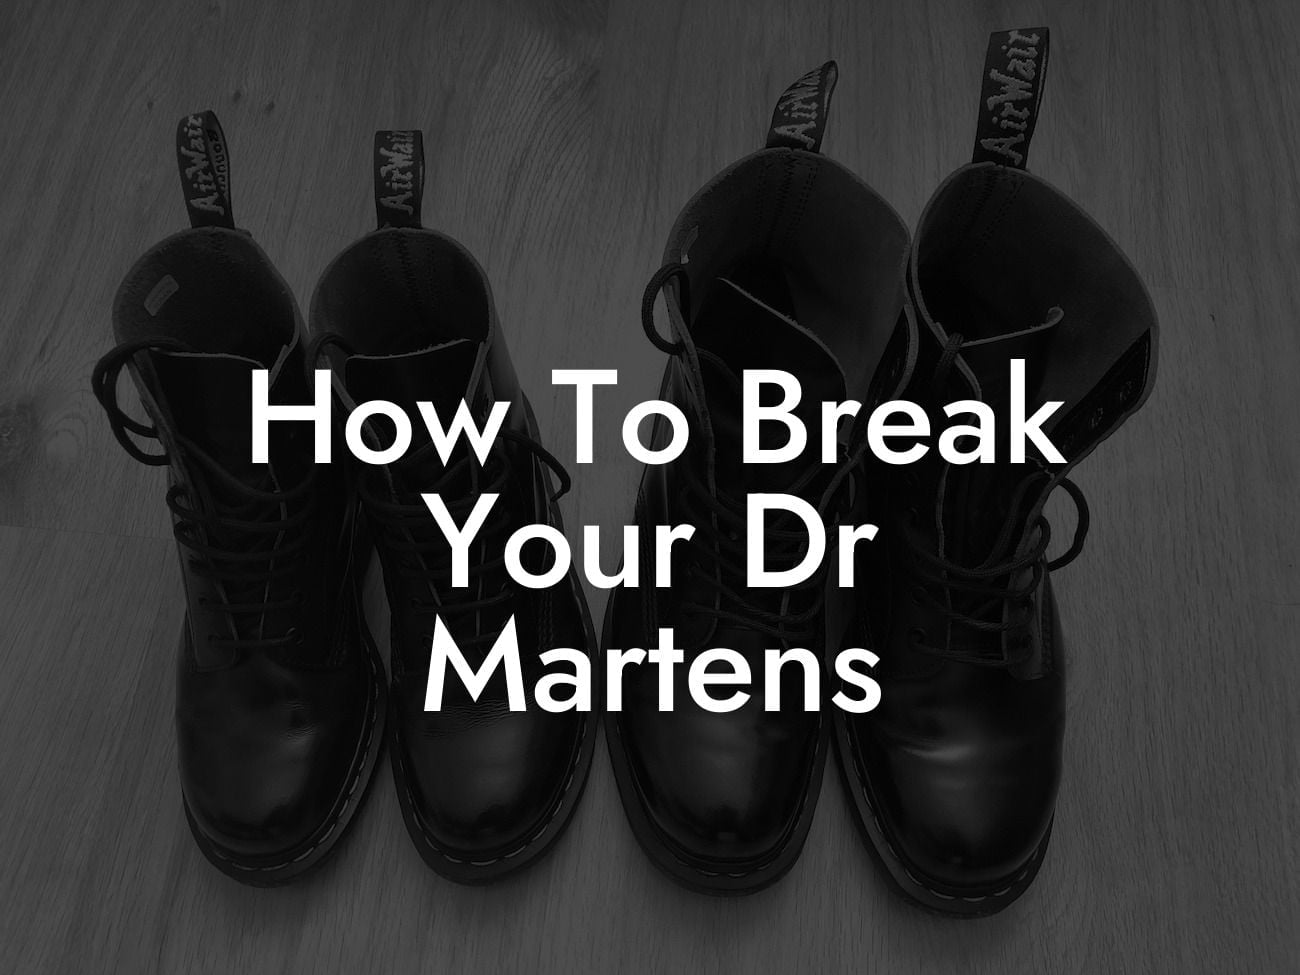 How To Break Your Dr Martens